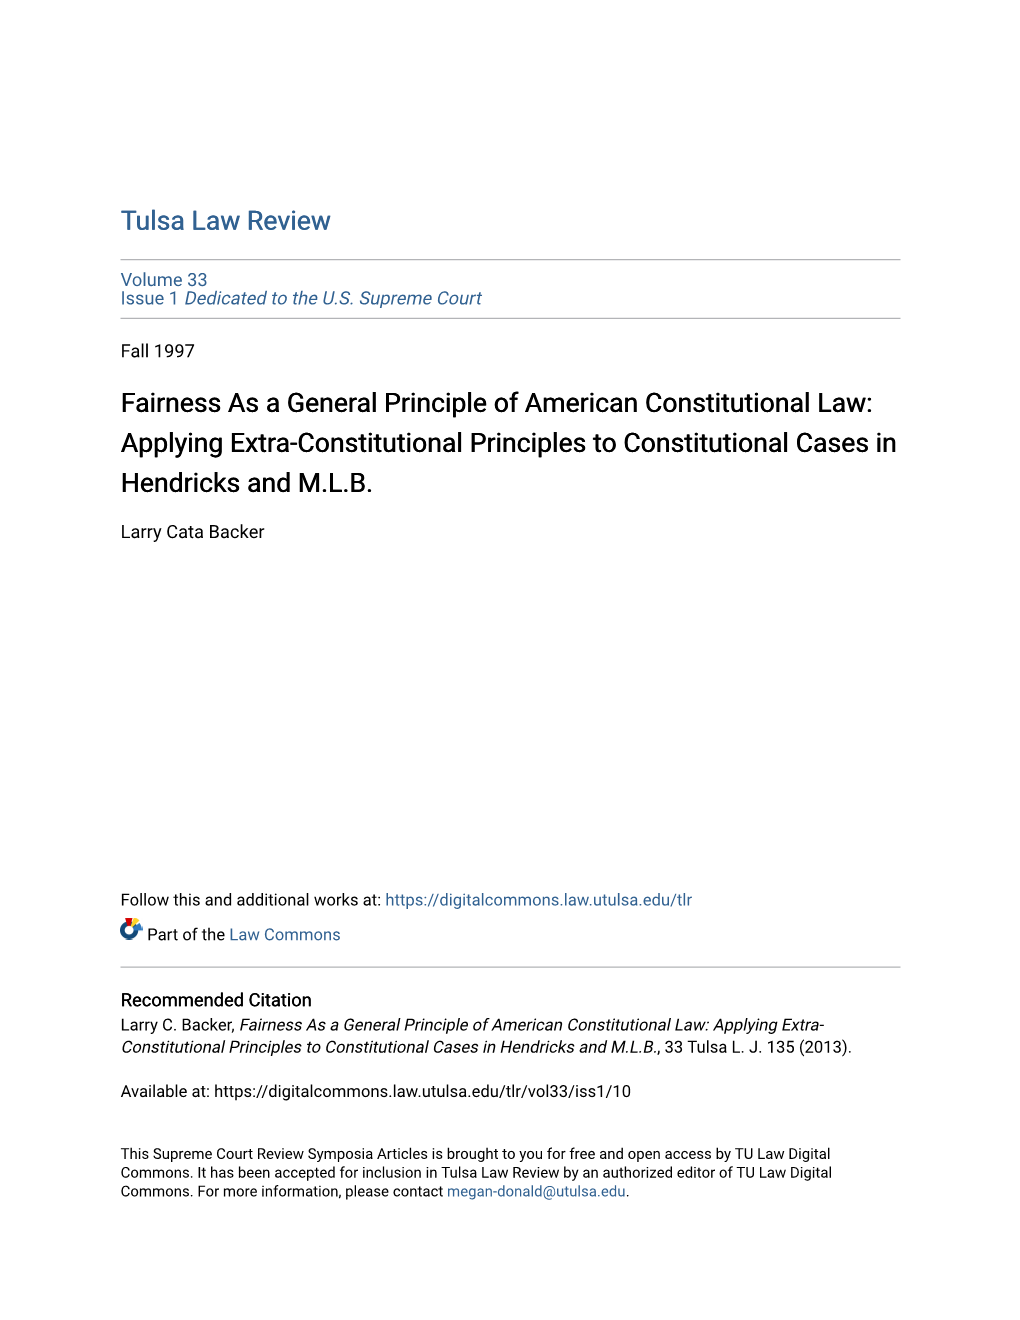 Fairness As a General Principle of American Constitutional Law: Applying Extra-Constitutional Principles to Constitutional Cases in Hendricks and M.L.B